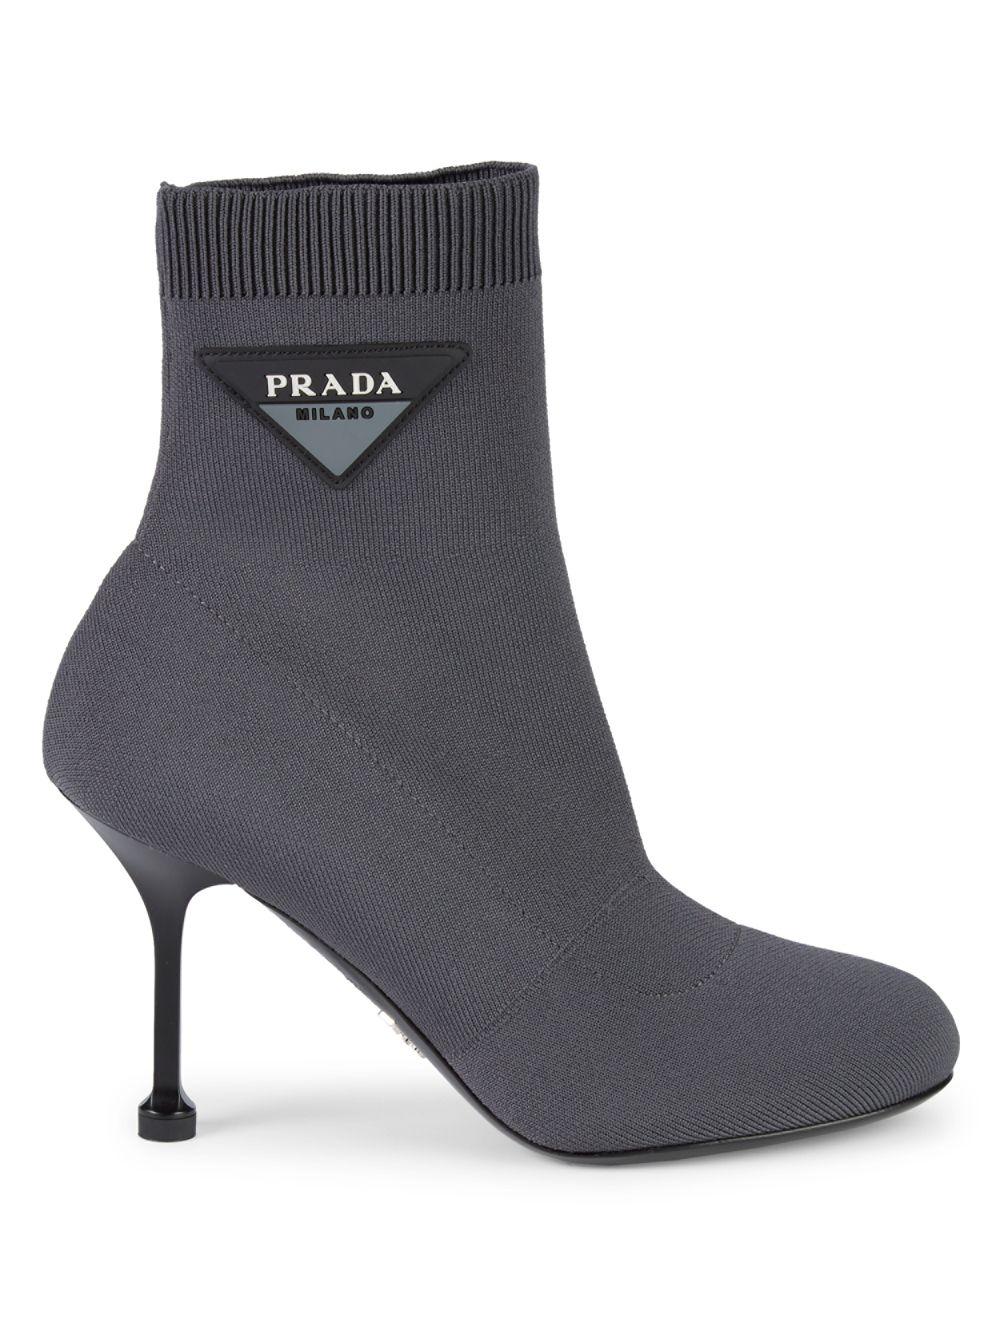 Prada Stretch Sock-fit Ankle Booties in Gray - Save 26% - Lyst